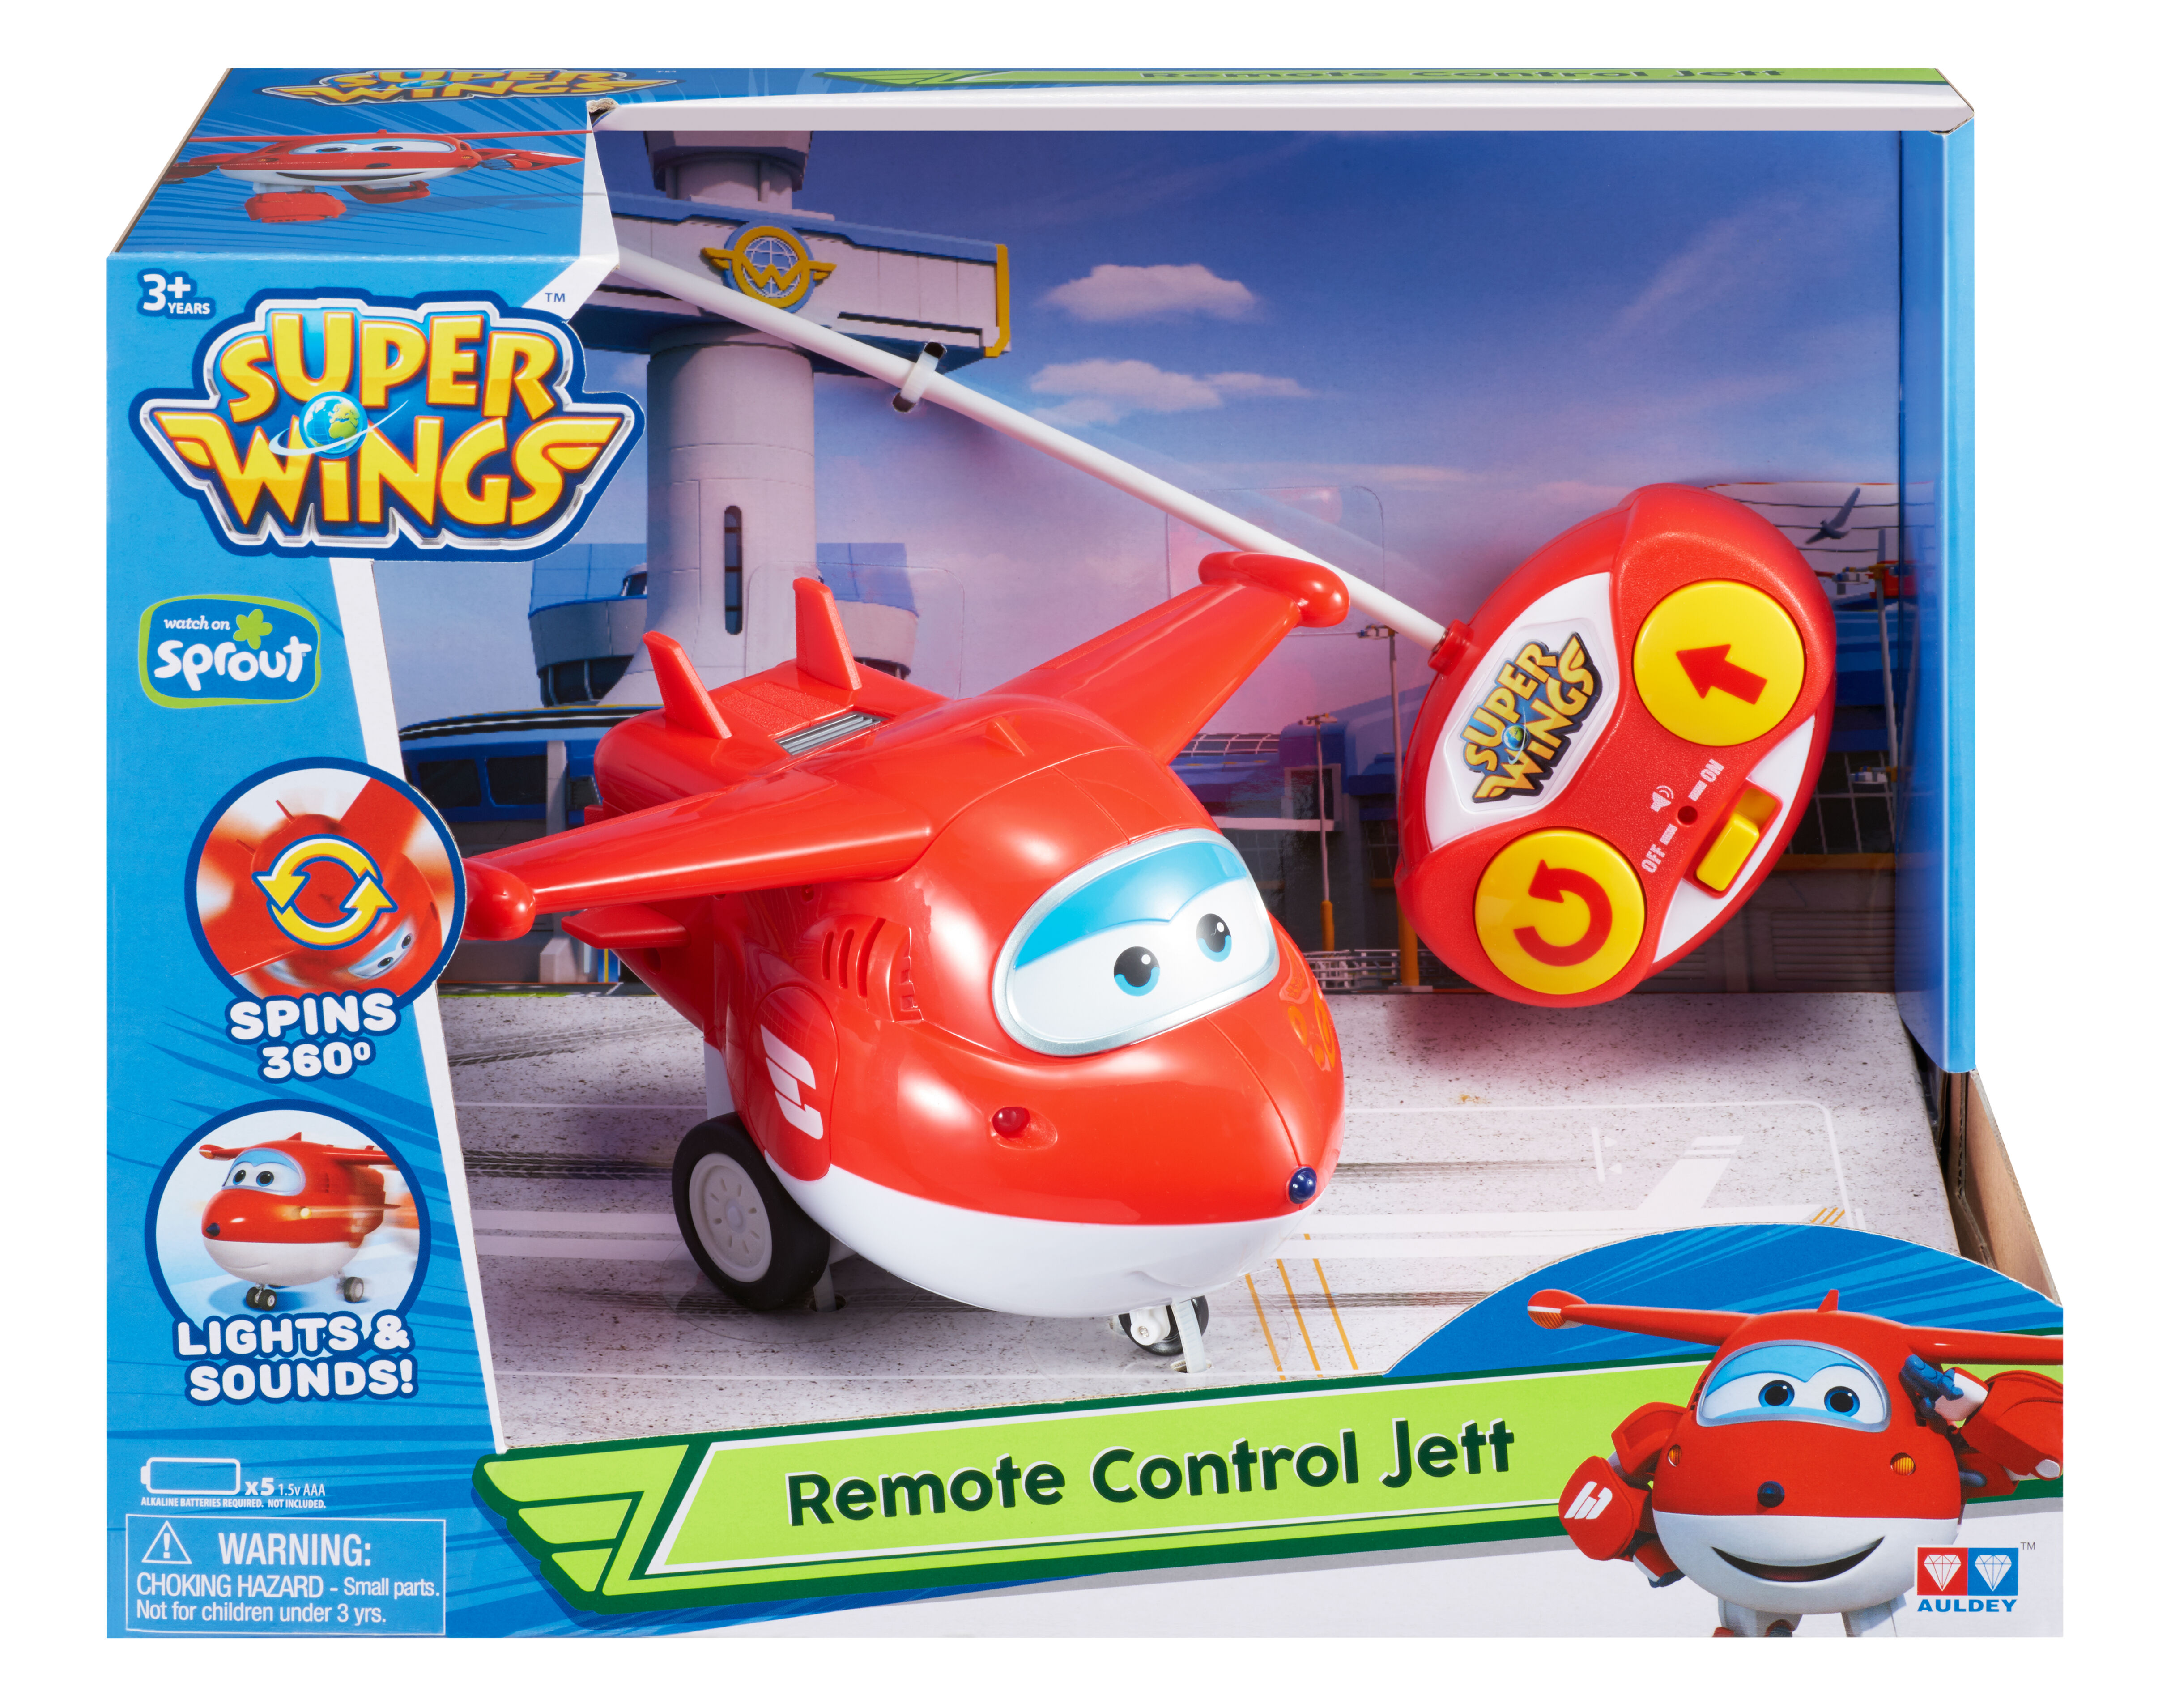 remote control helicopter toys r us